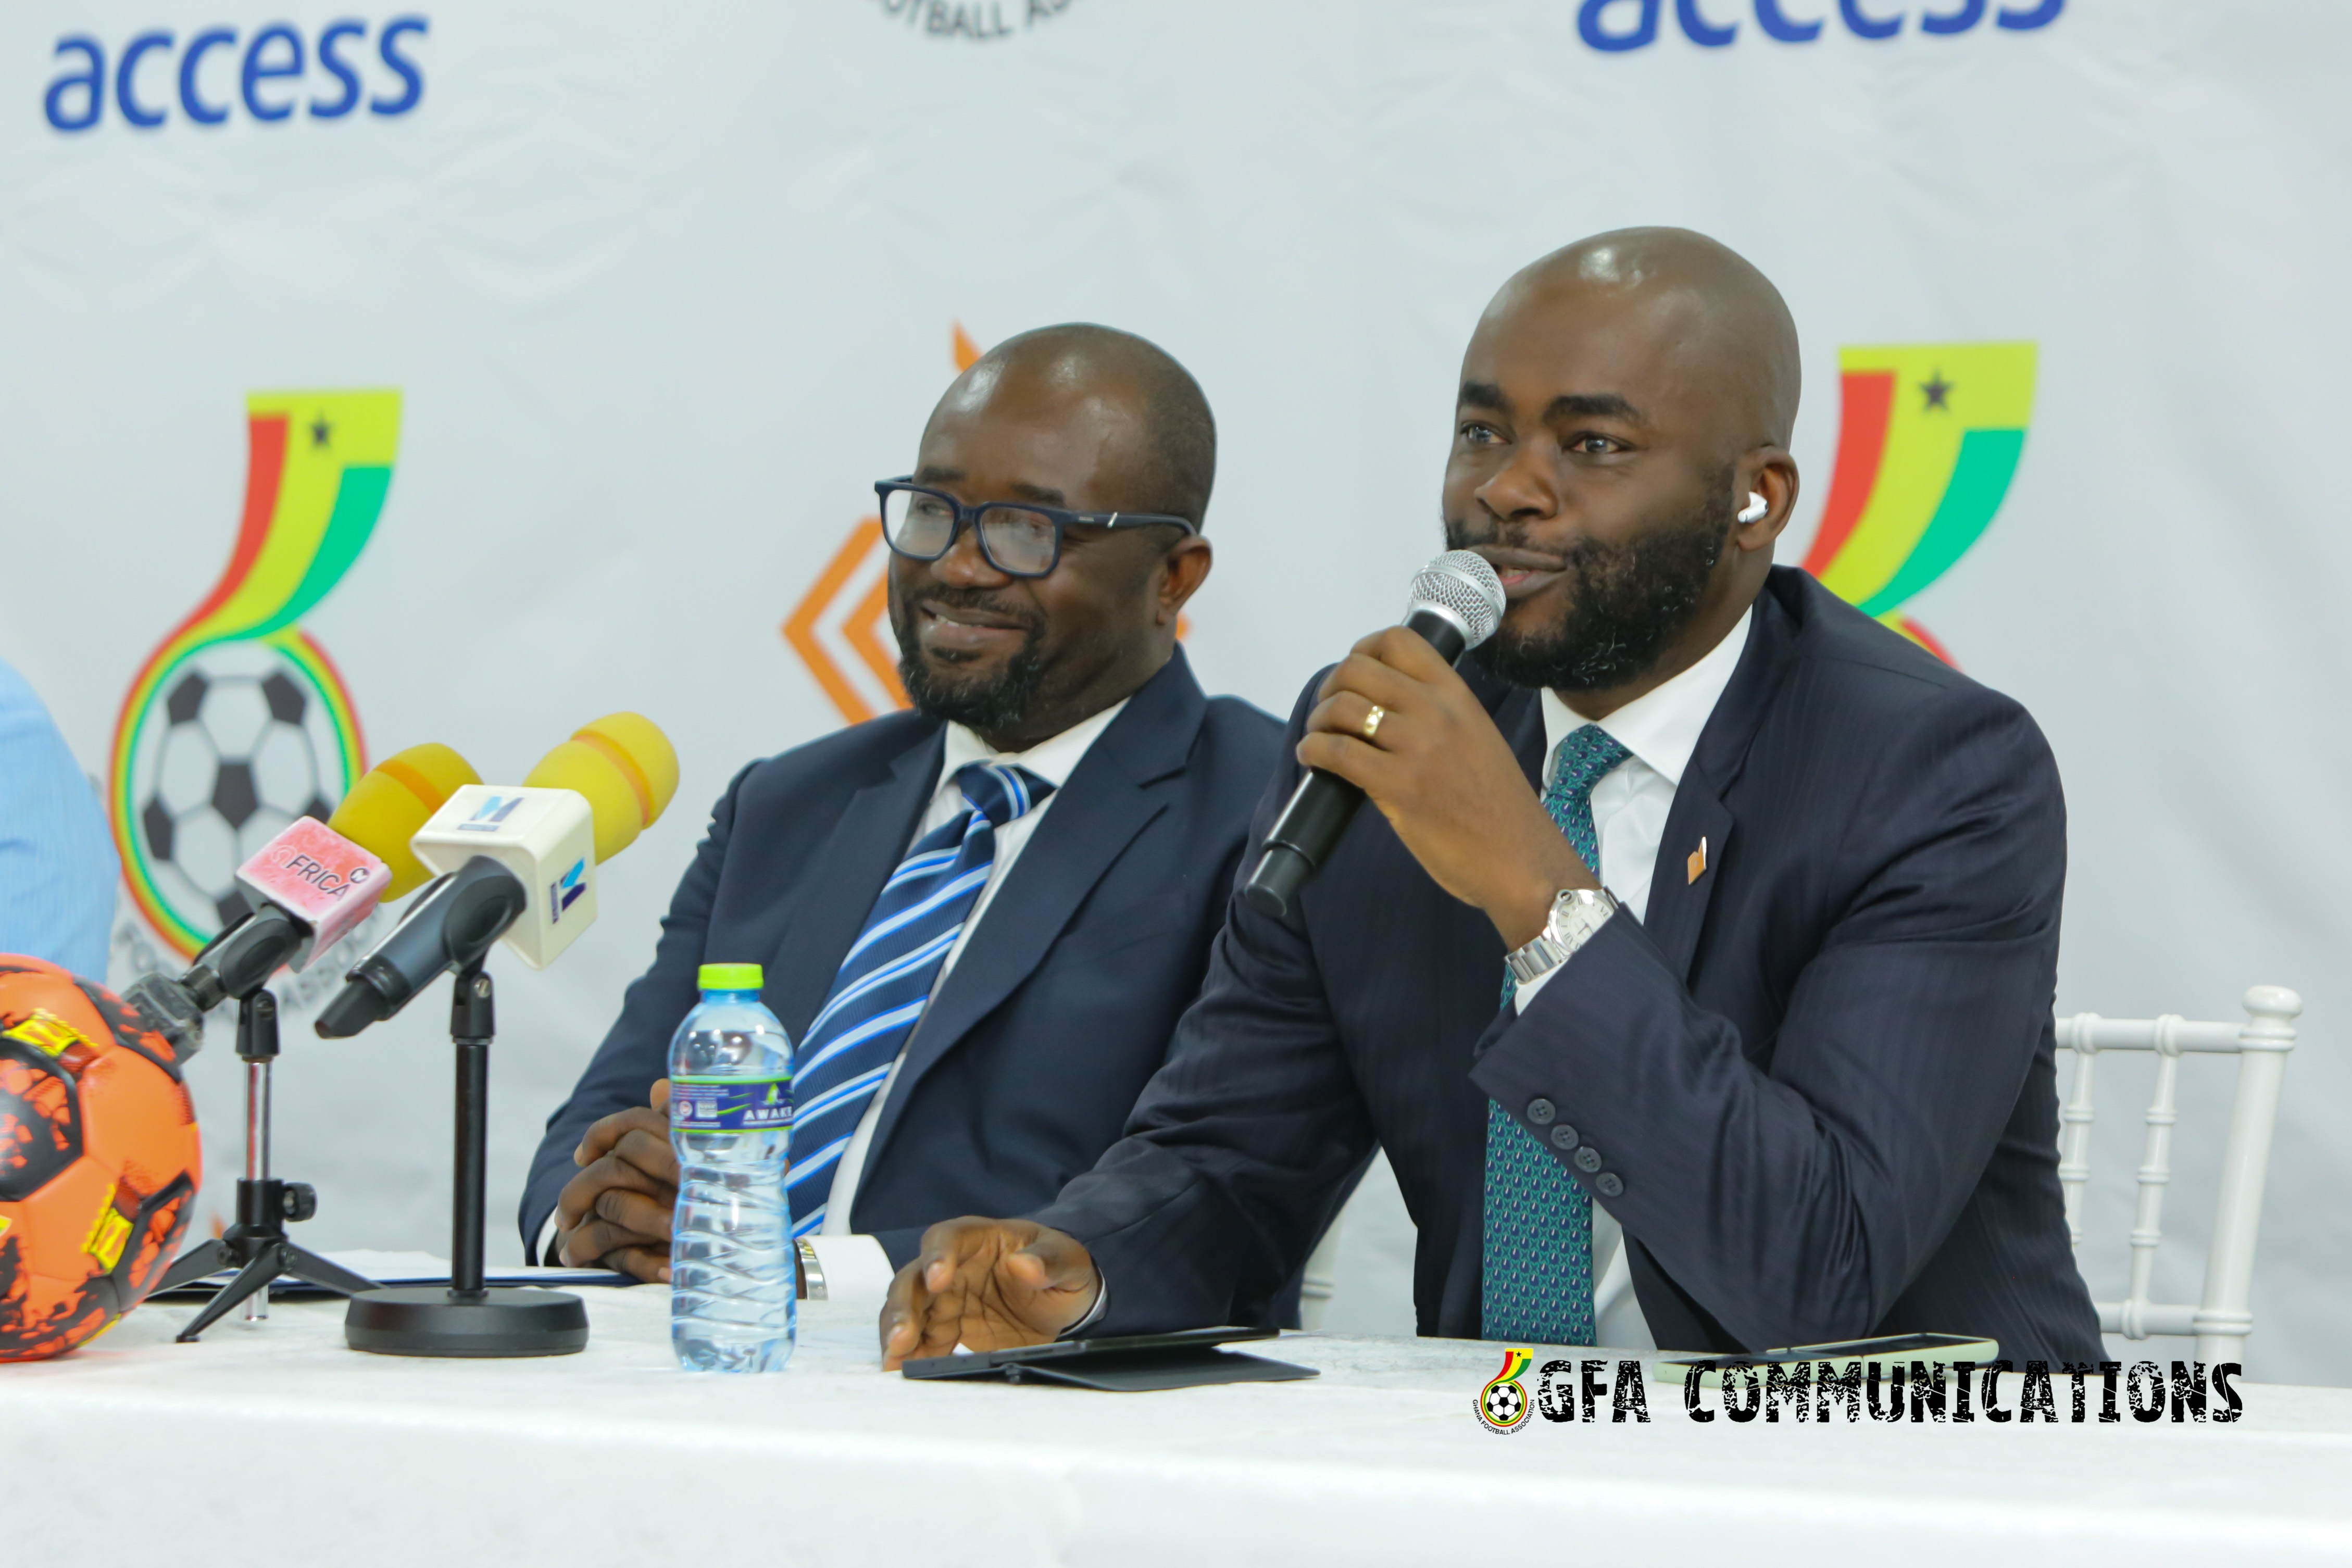 Commitment to develop Ghana football is exciting to us - Access Bank